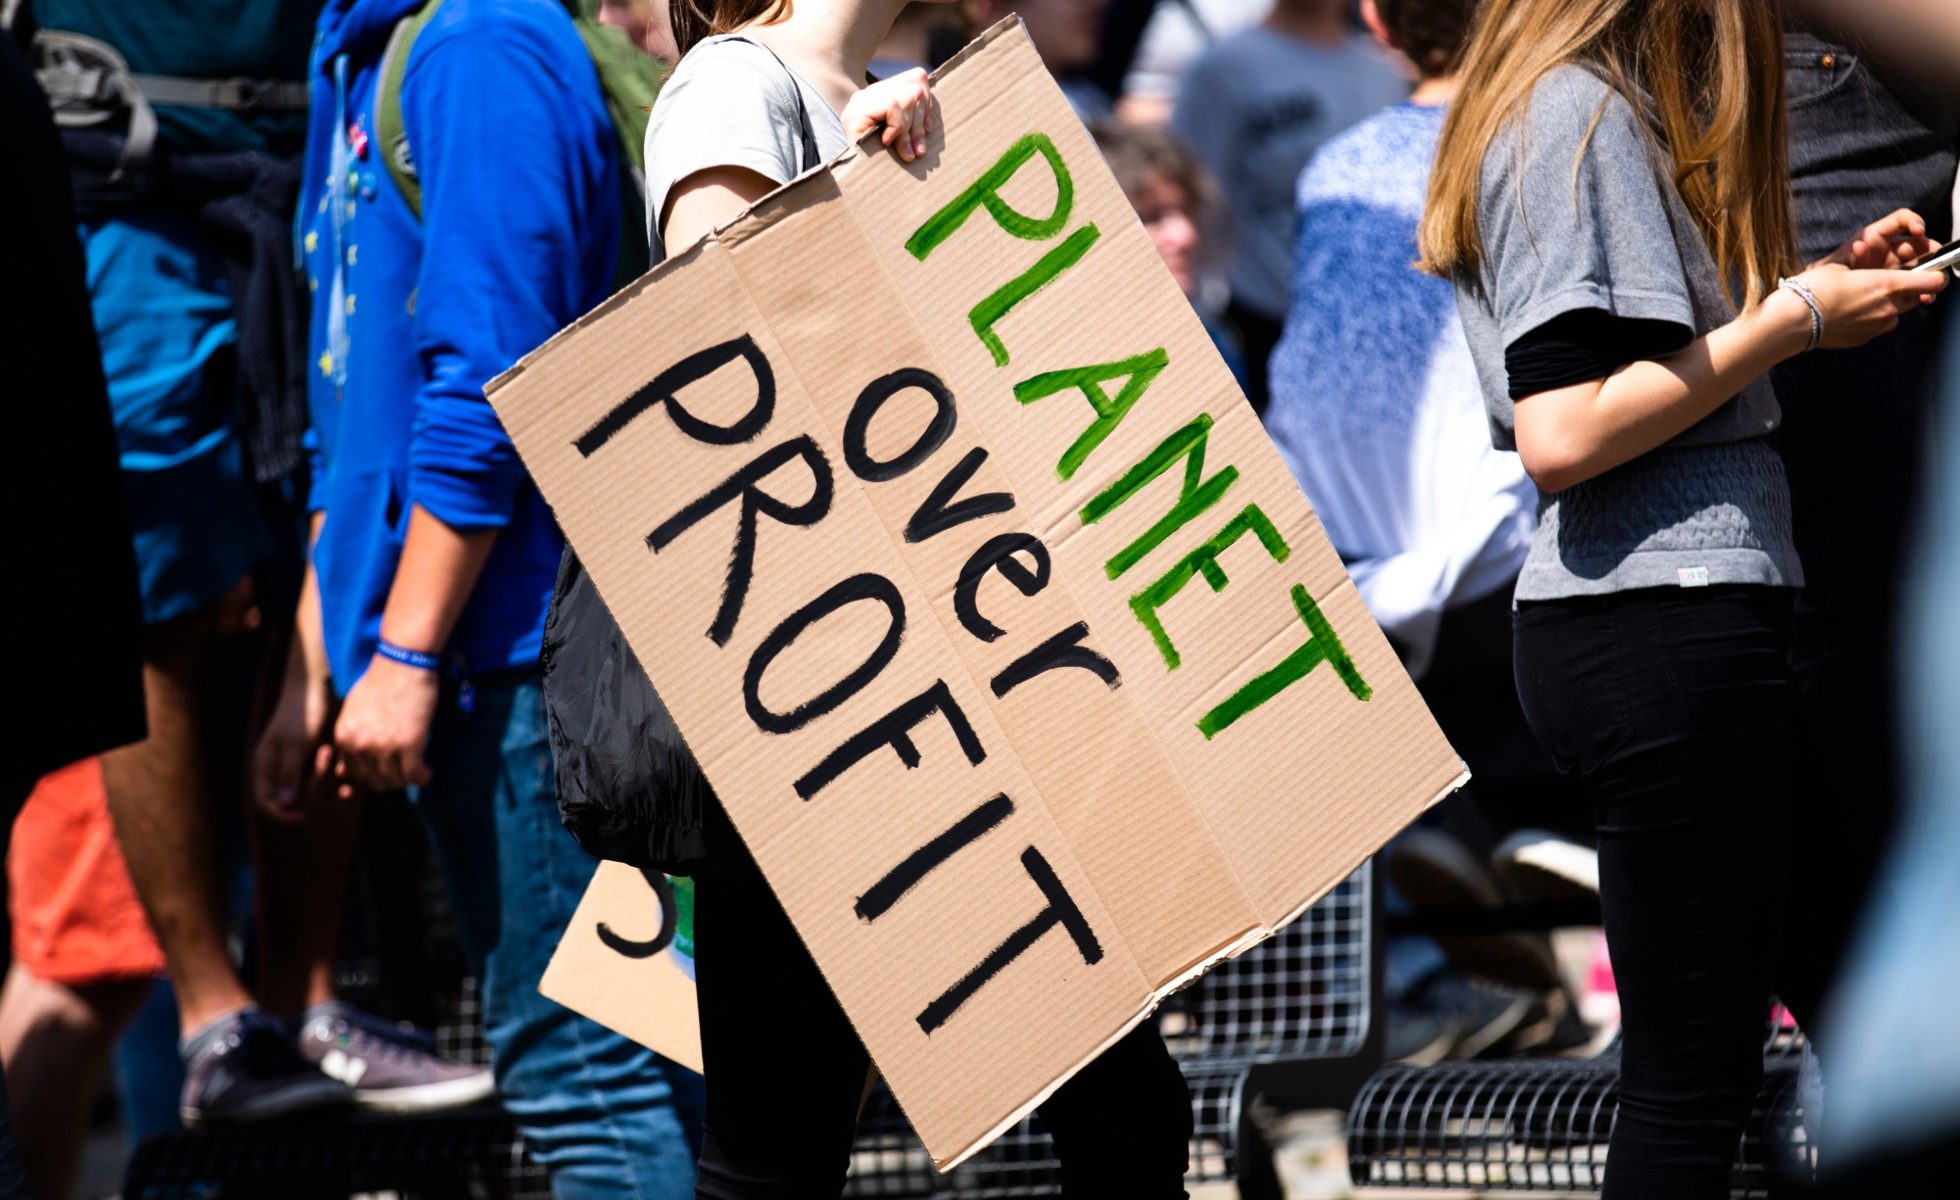 planet over profit sign